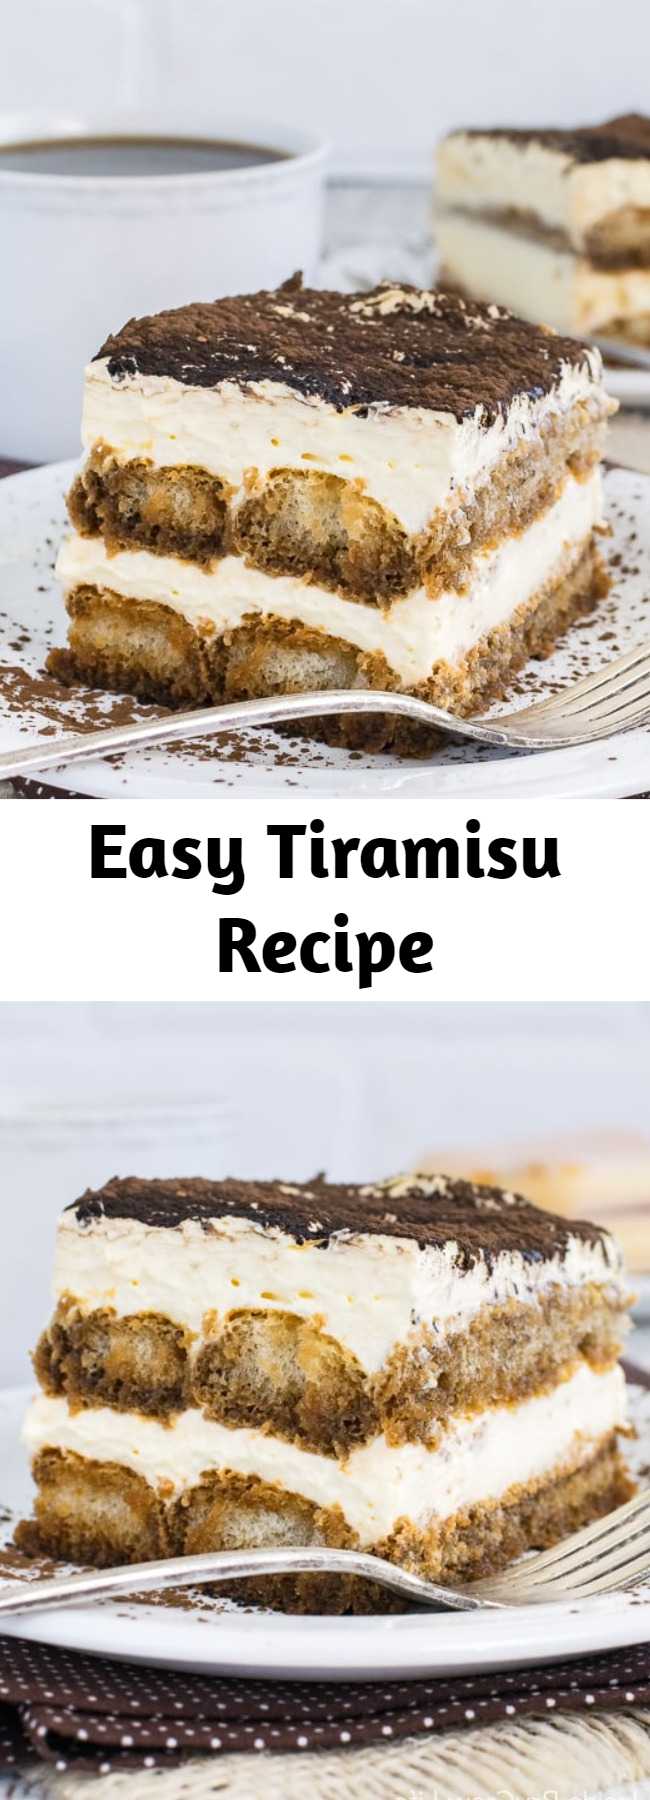 Easy Tiramisu Recipe - The creamy cheesecake and coffee soaked cookie layers in this Easy Tiramisu will have everyone coming back for another slice. Great dessert to share at any dinner.